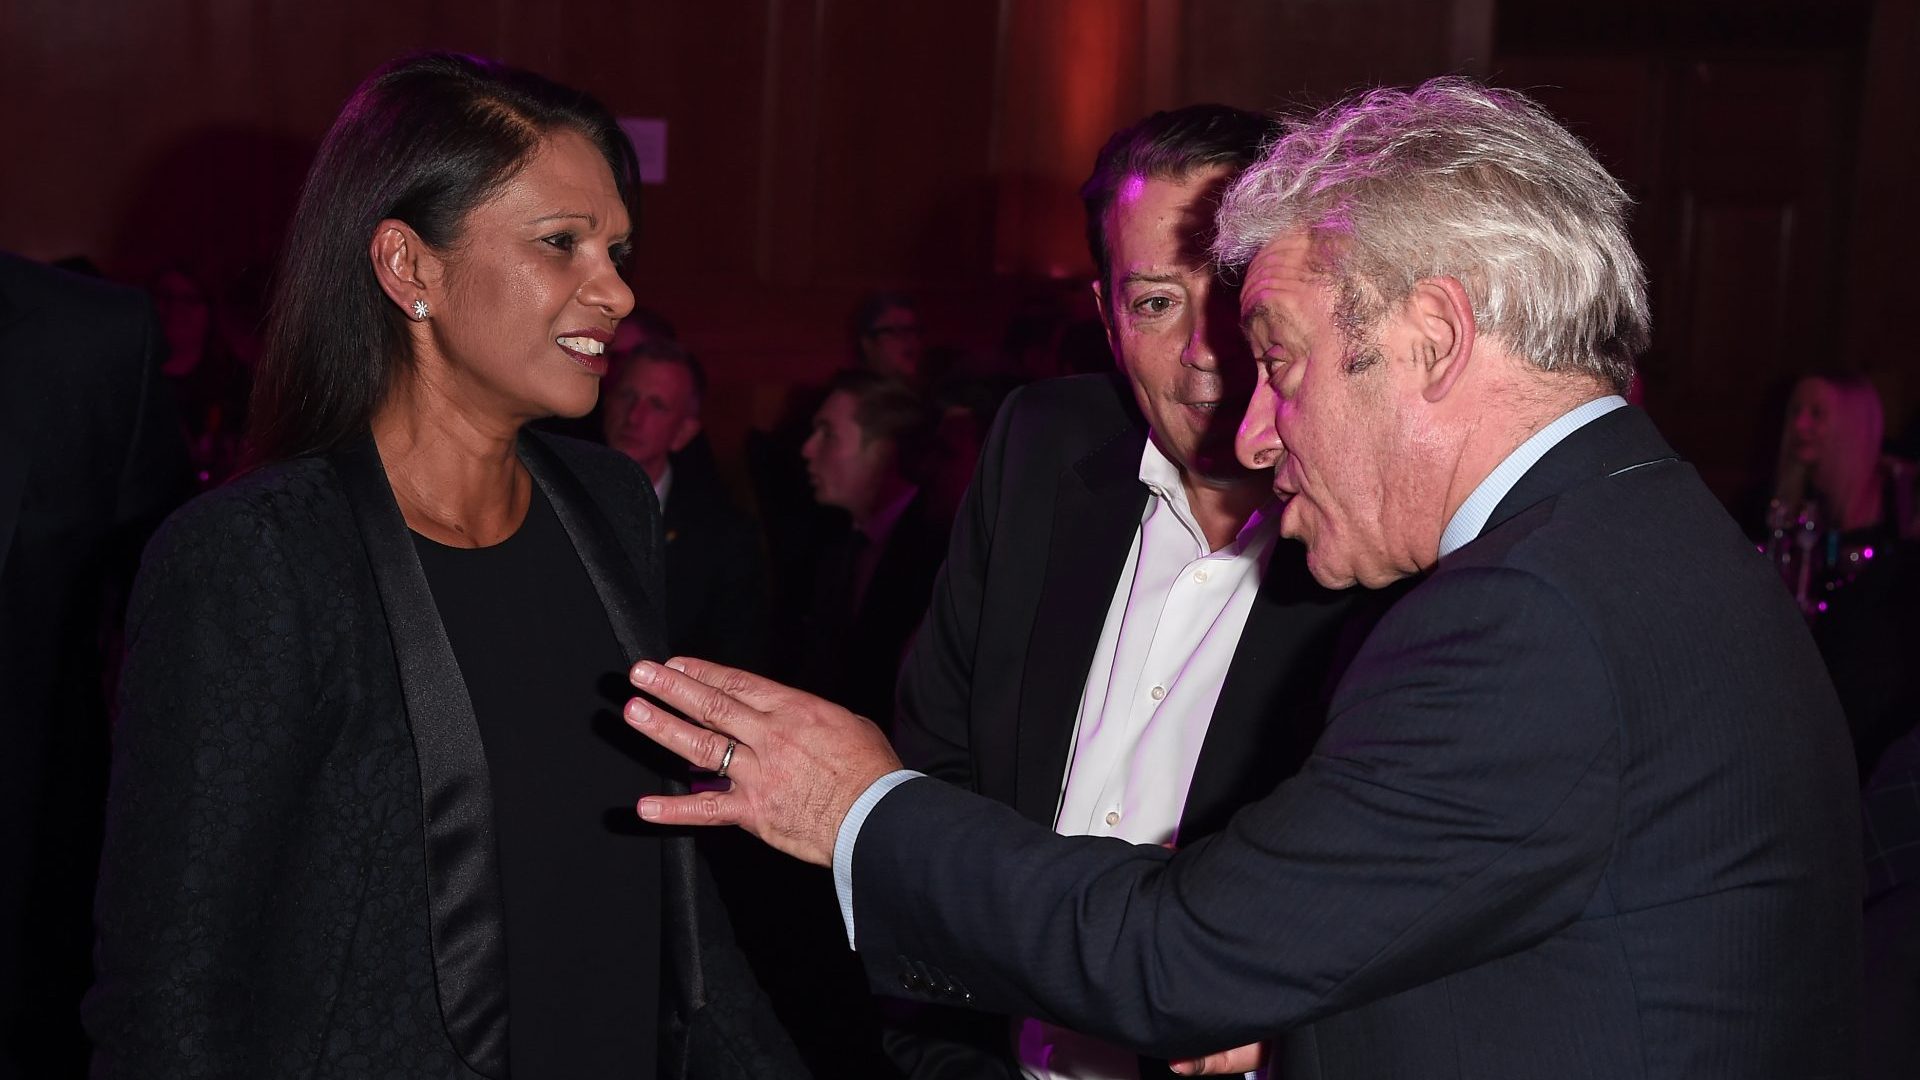 Gina Miller and John Bercow attending the PinkNews Awards in 2019 (Photo by Eamonn M. McCormack/Getty Images)